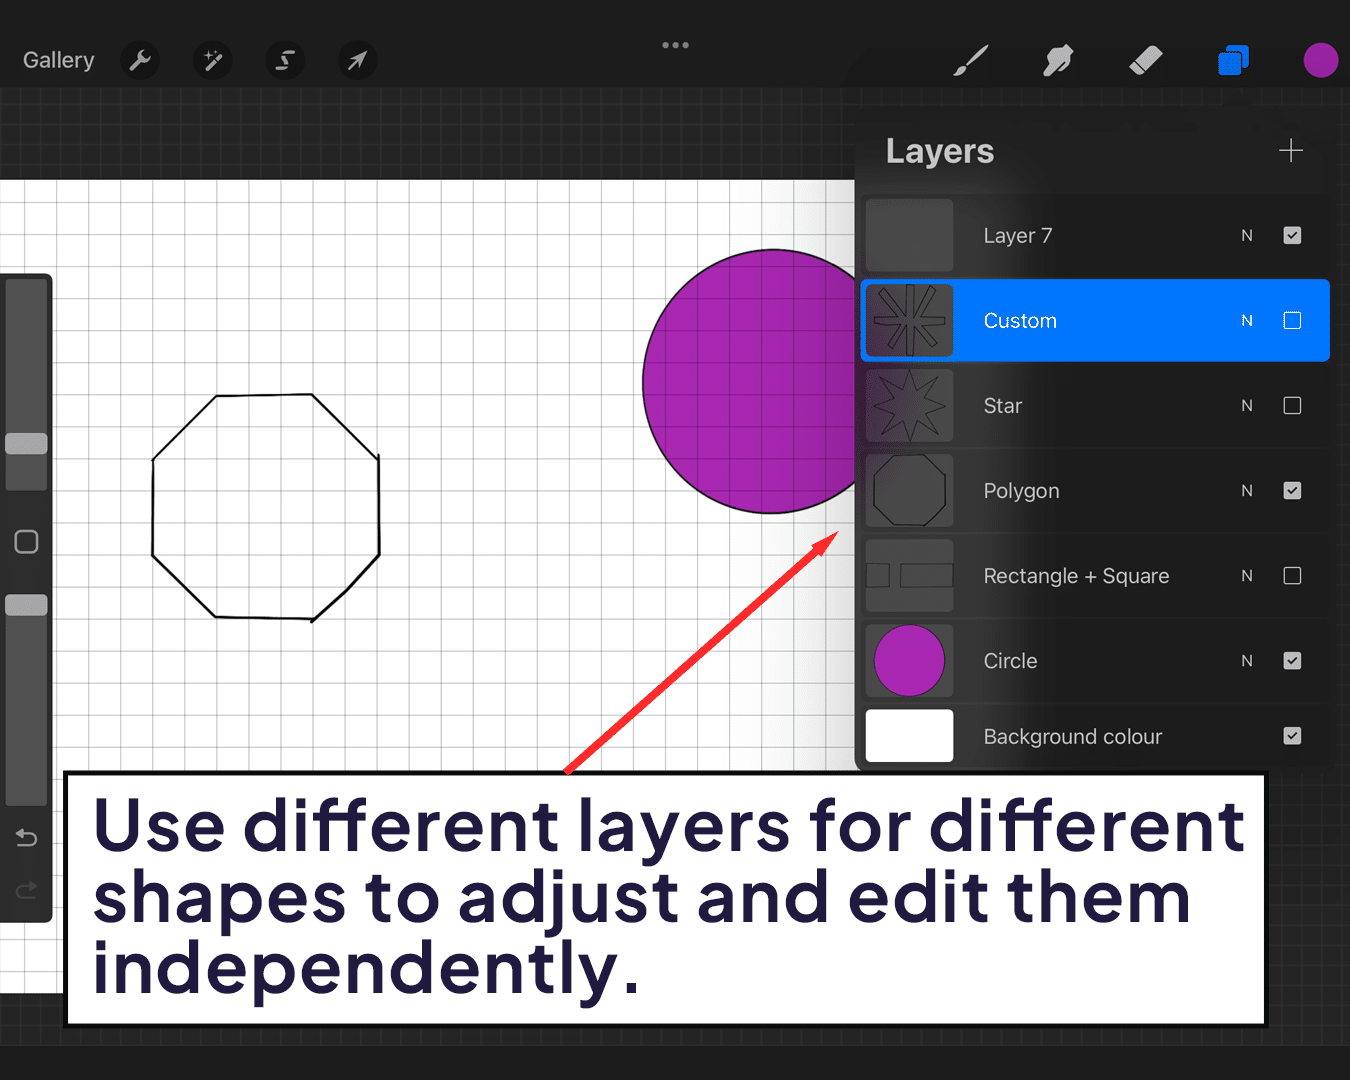 Using different layers for different shapes